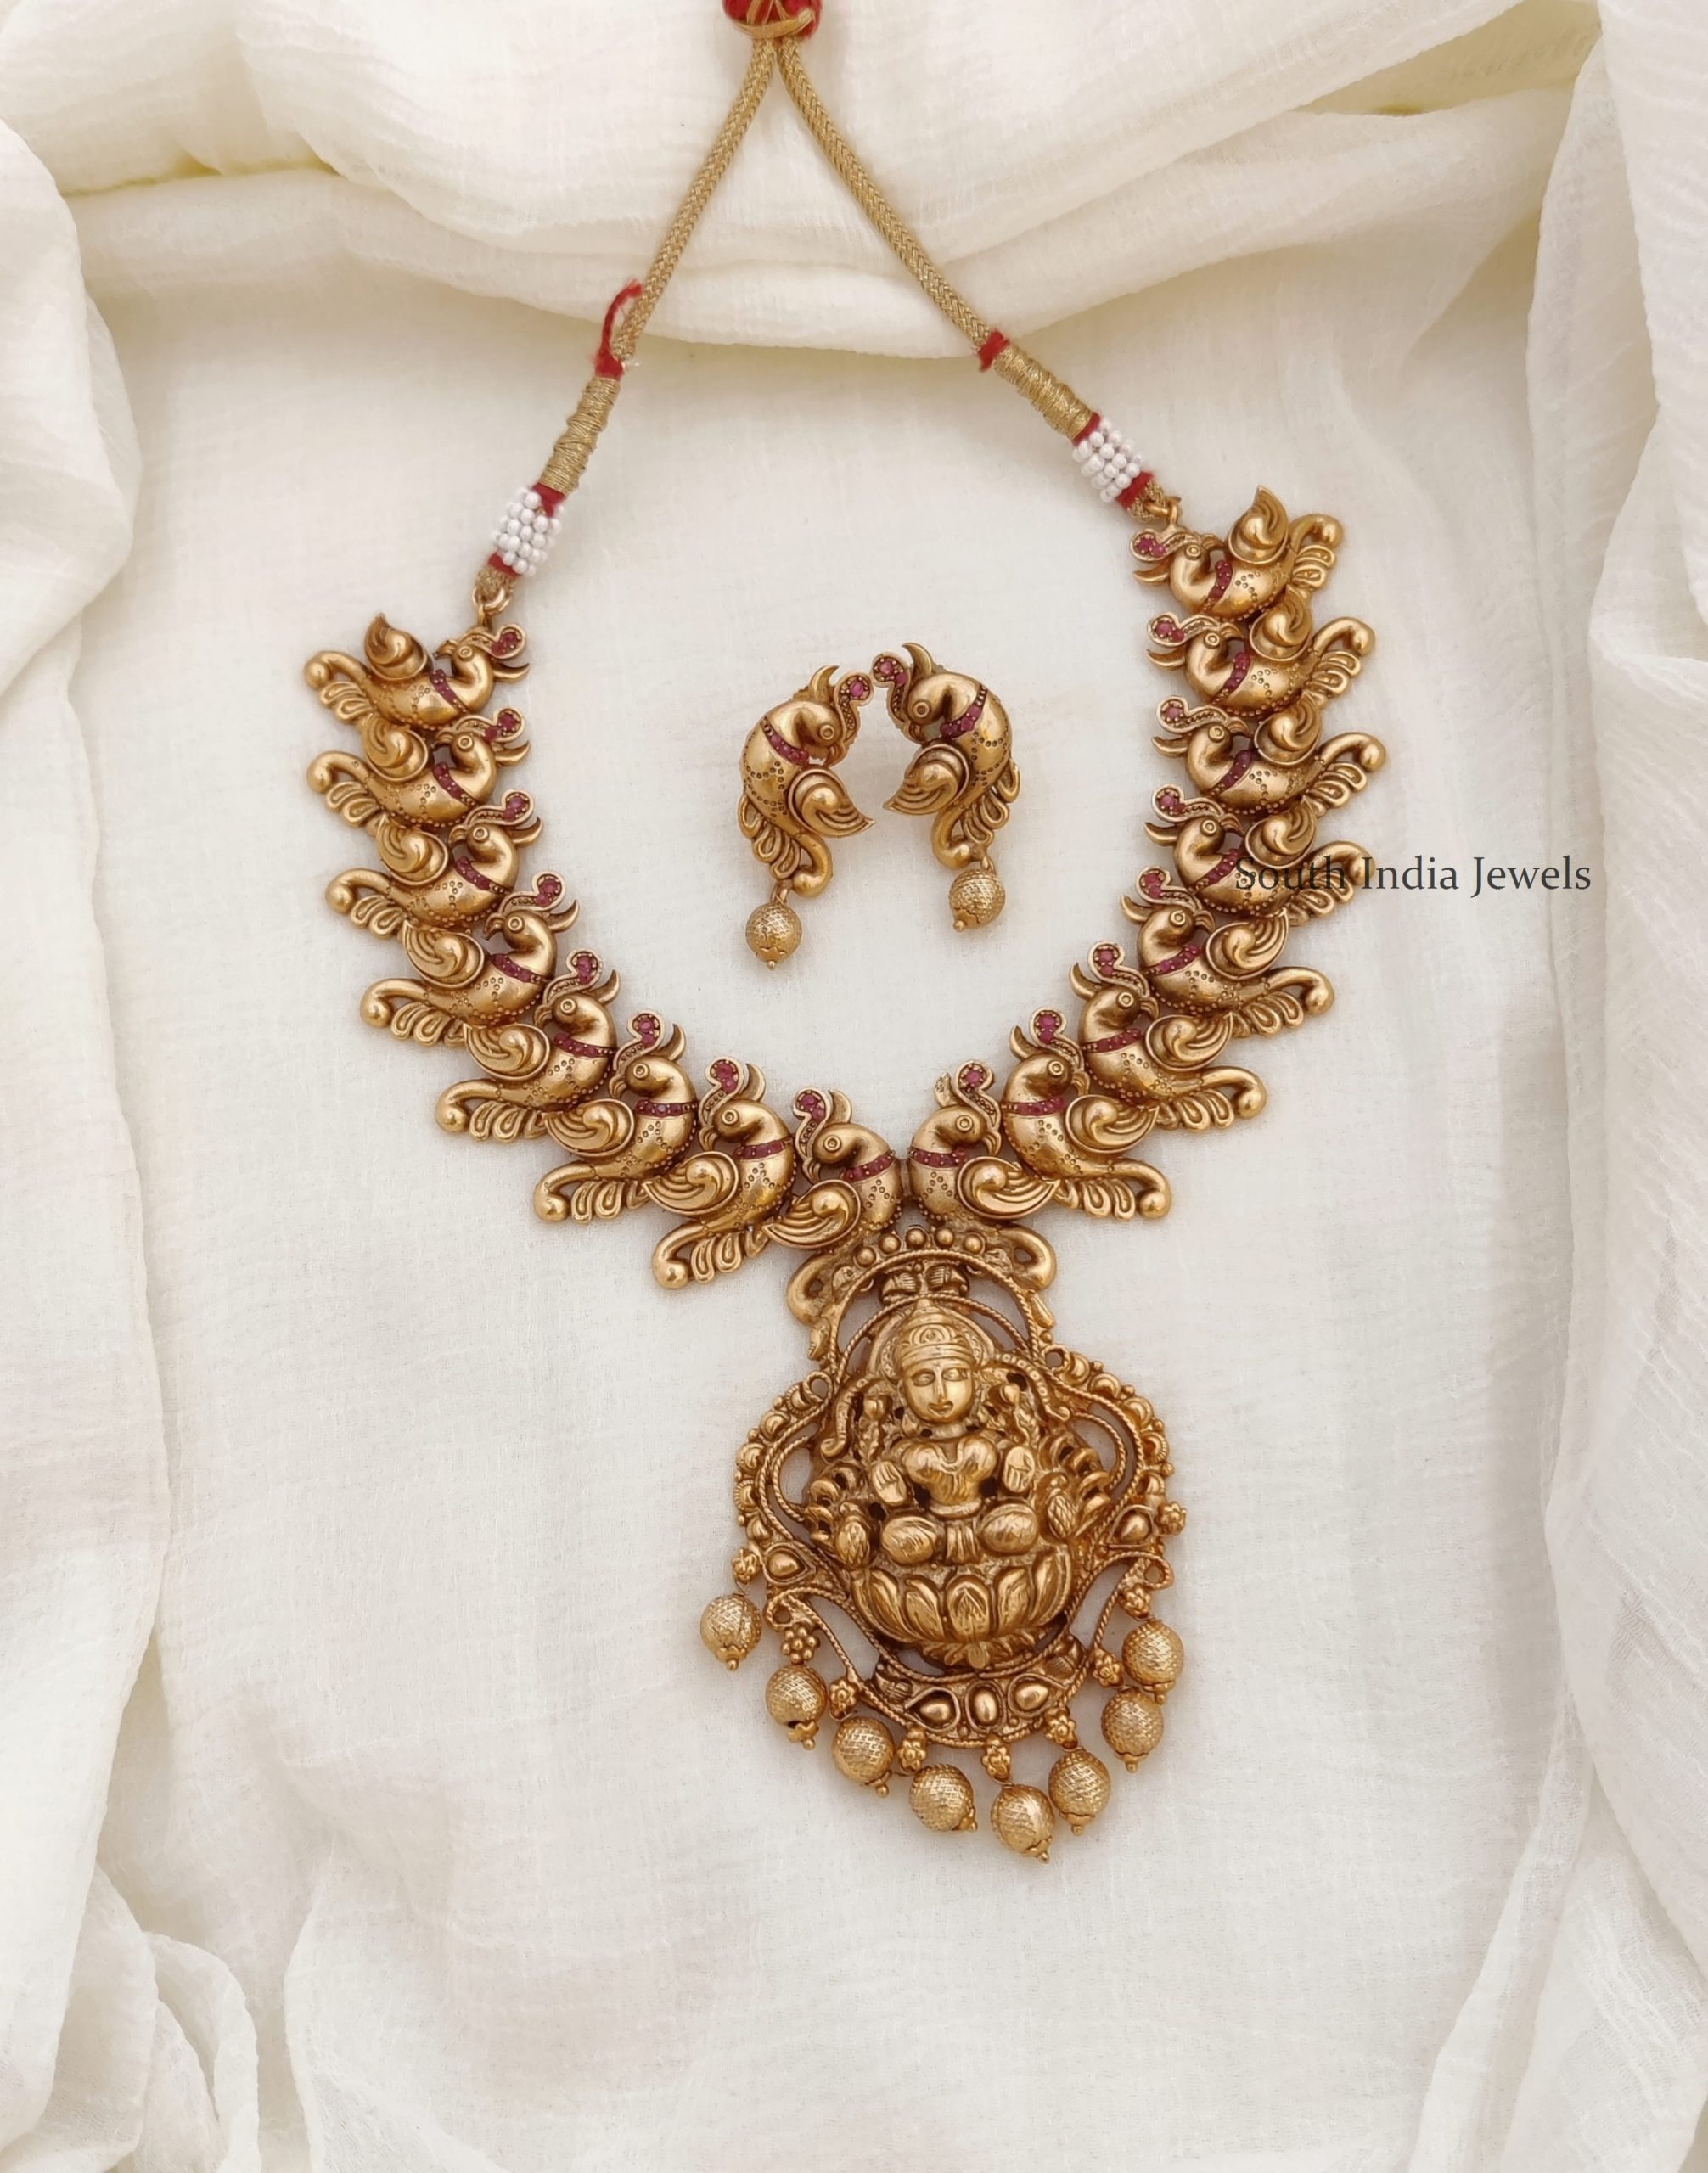 Antique Peacock Design Necklace | Antique Jewelry - South India Jewels